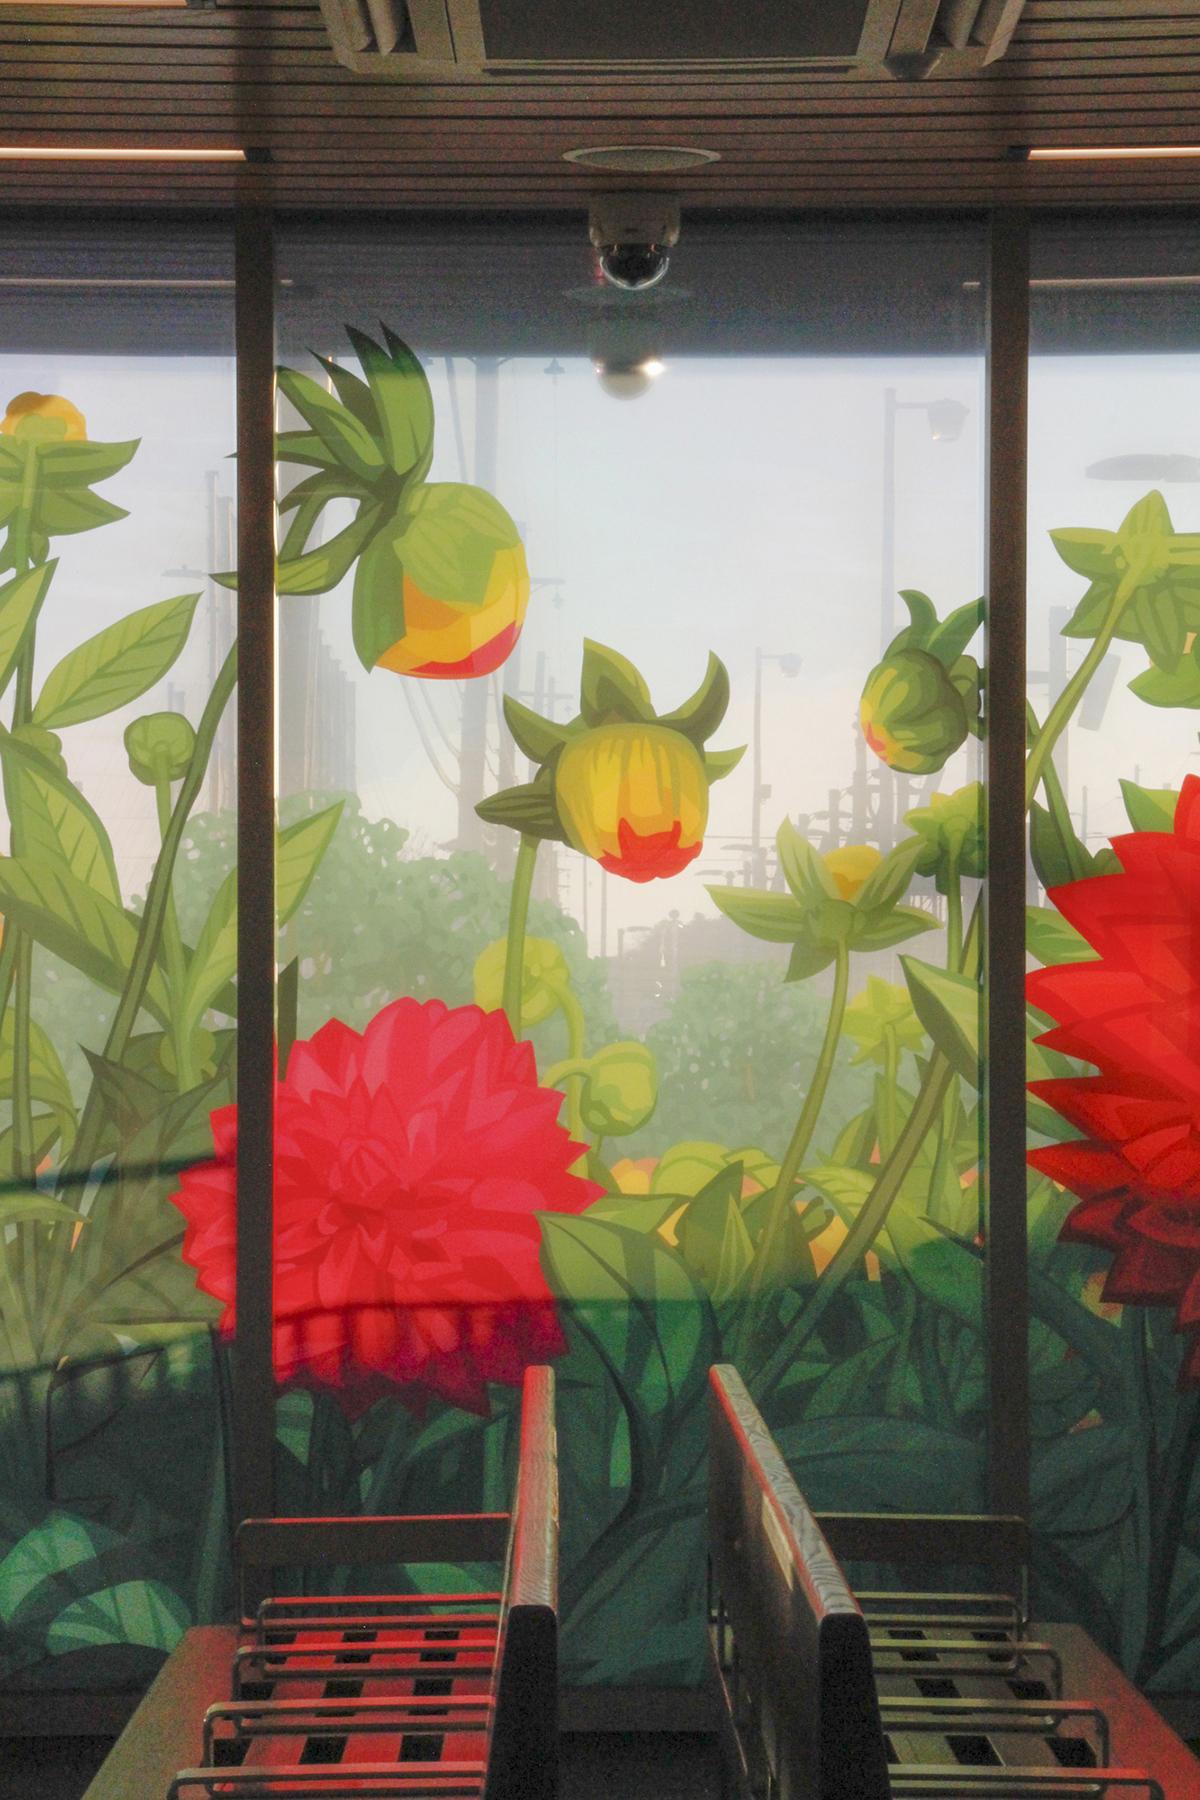 Photograph of laminated glass artwork on the walls of the LIRR Deer Park station house. Photo taken from inside waiting area with light shining through large pink dahlias and tall green grass and leaves of artwork with benches in the foreground.